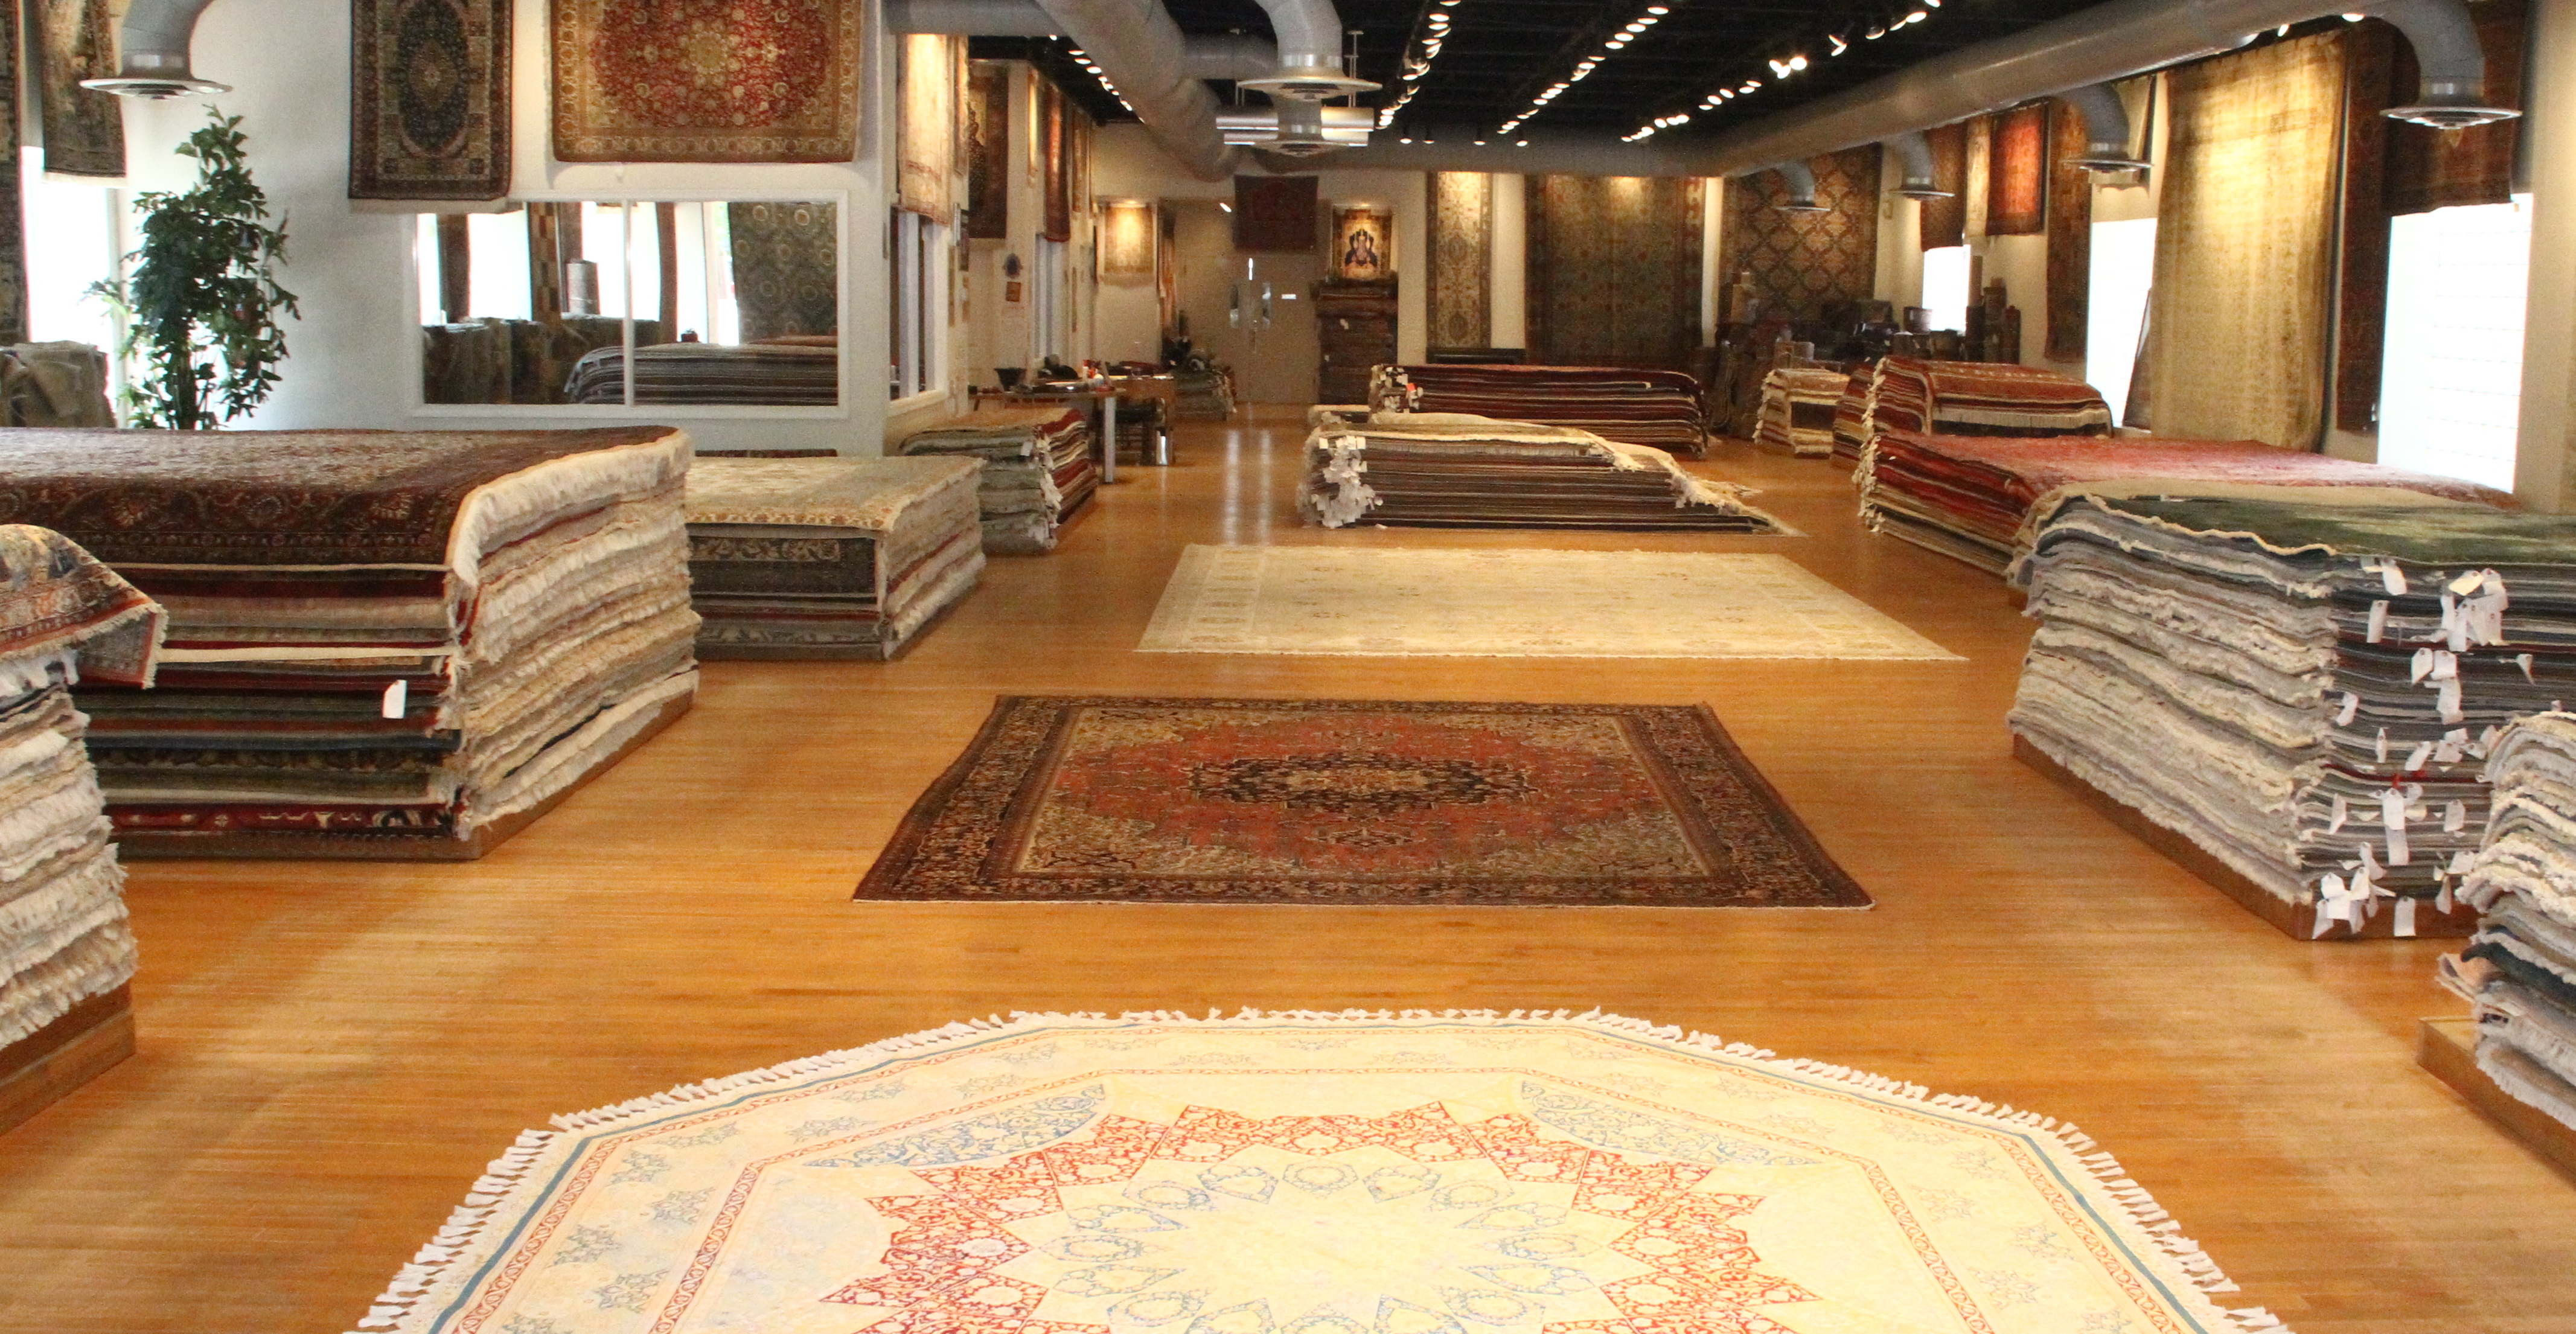 What Are the Benefits of Owning an Oriental Rug?